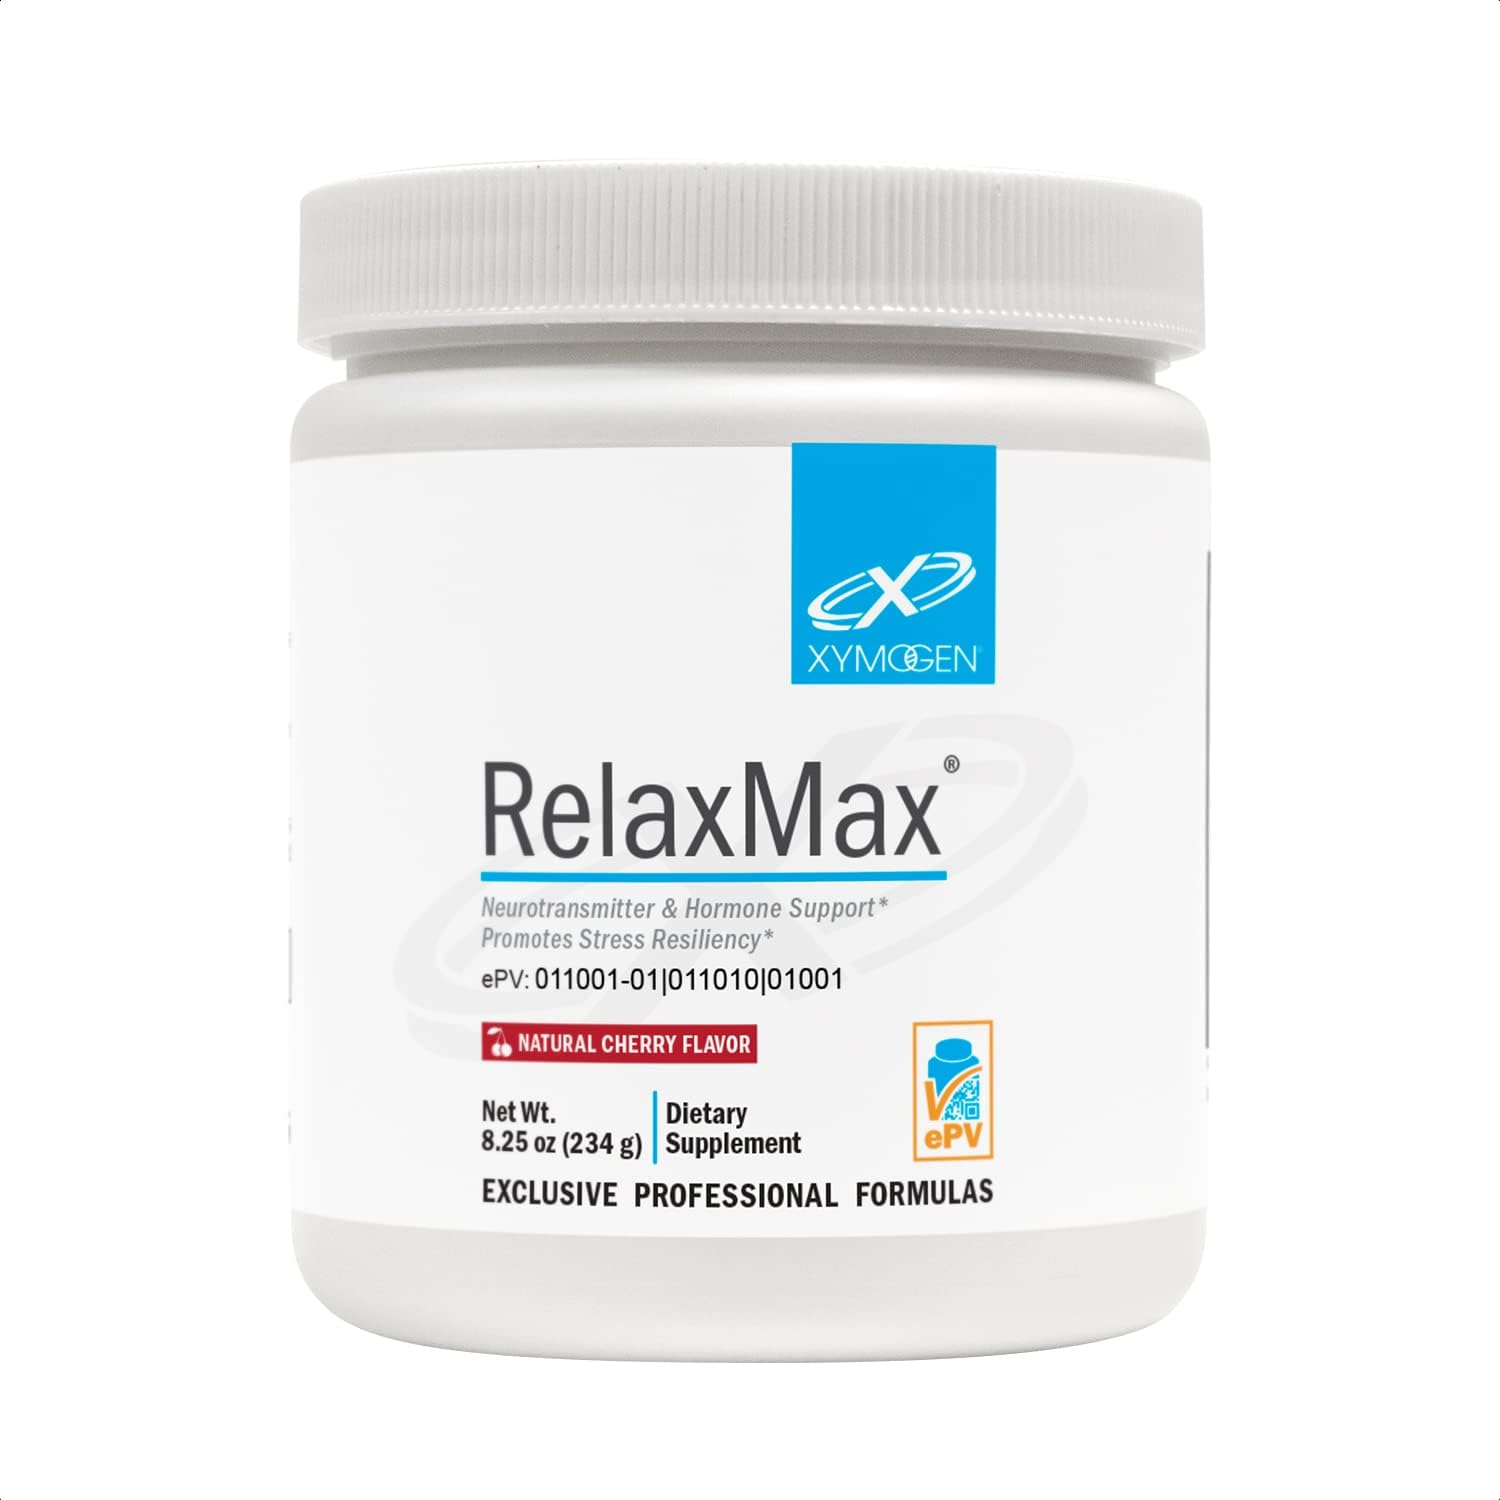 XYMOGEN RelaxMax Drink Mix - Promotes Relaxation, Stress Resiliency +